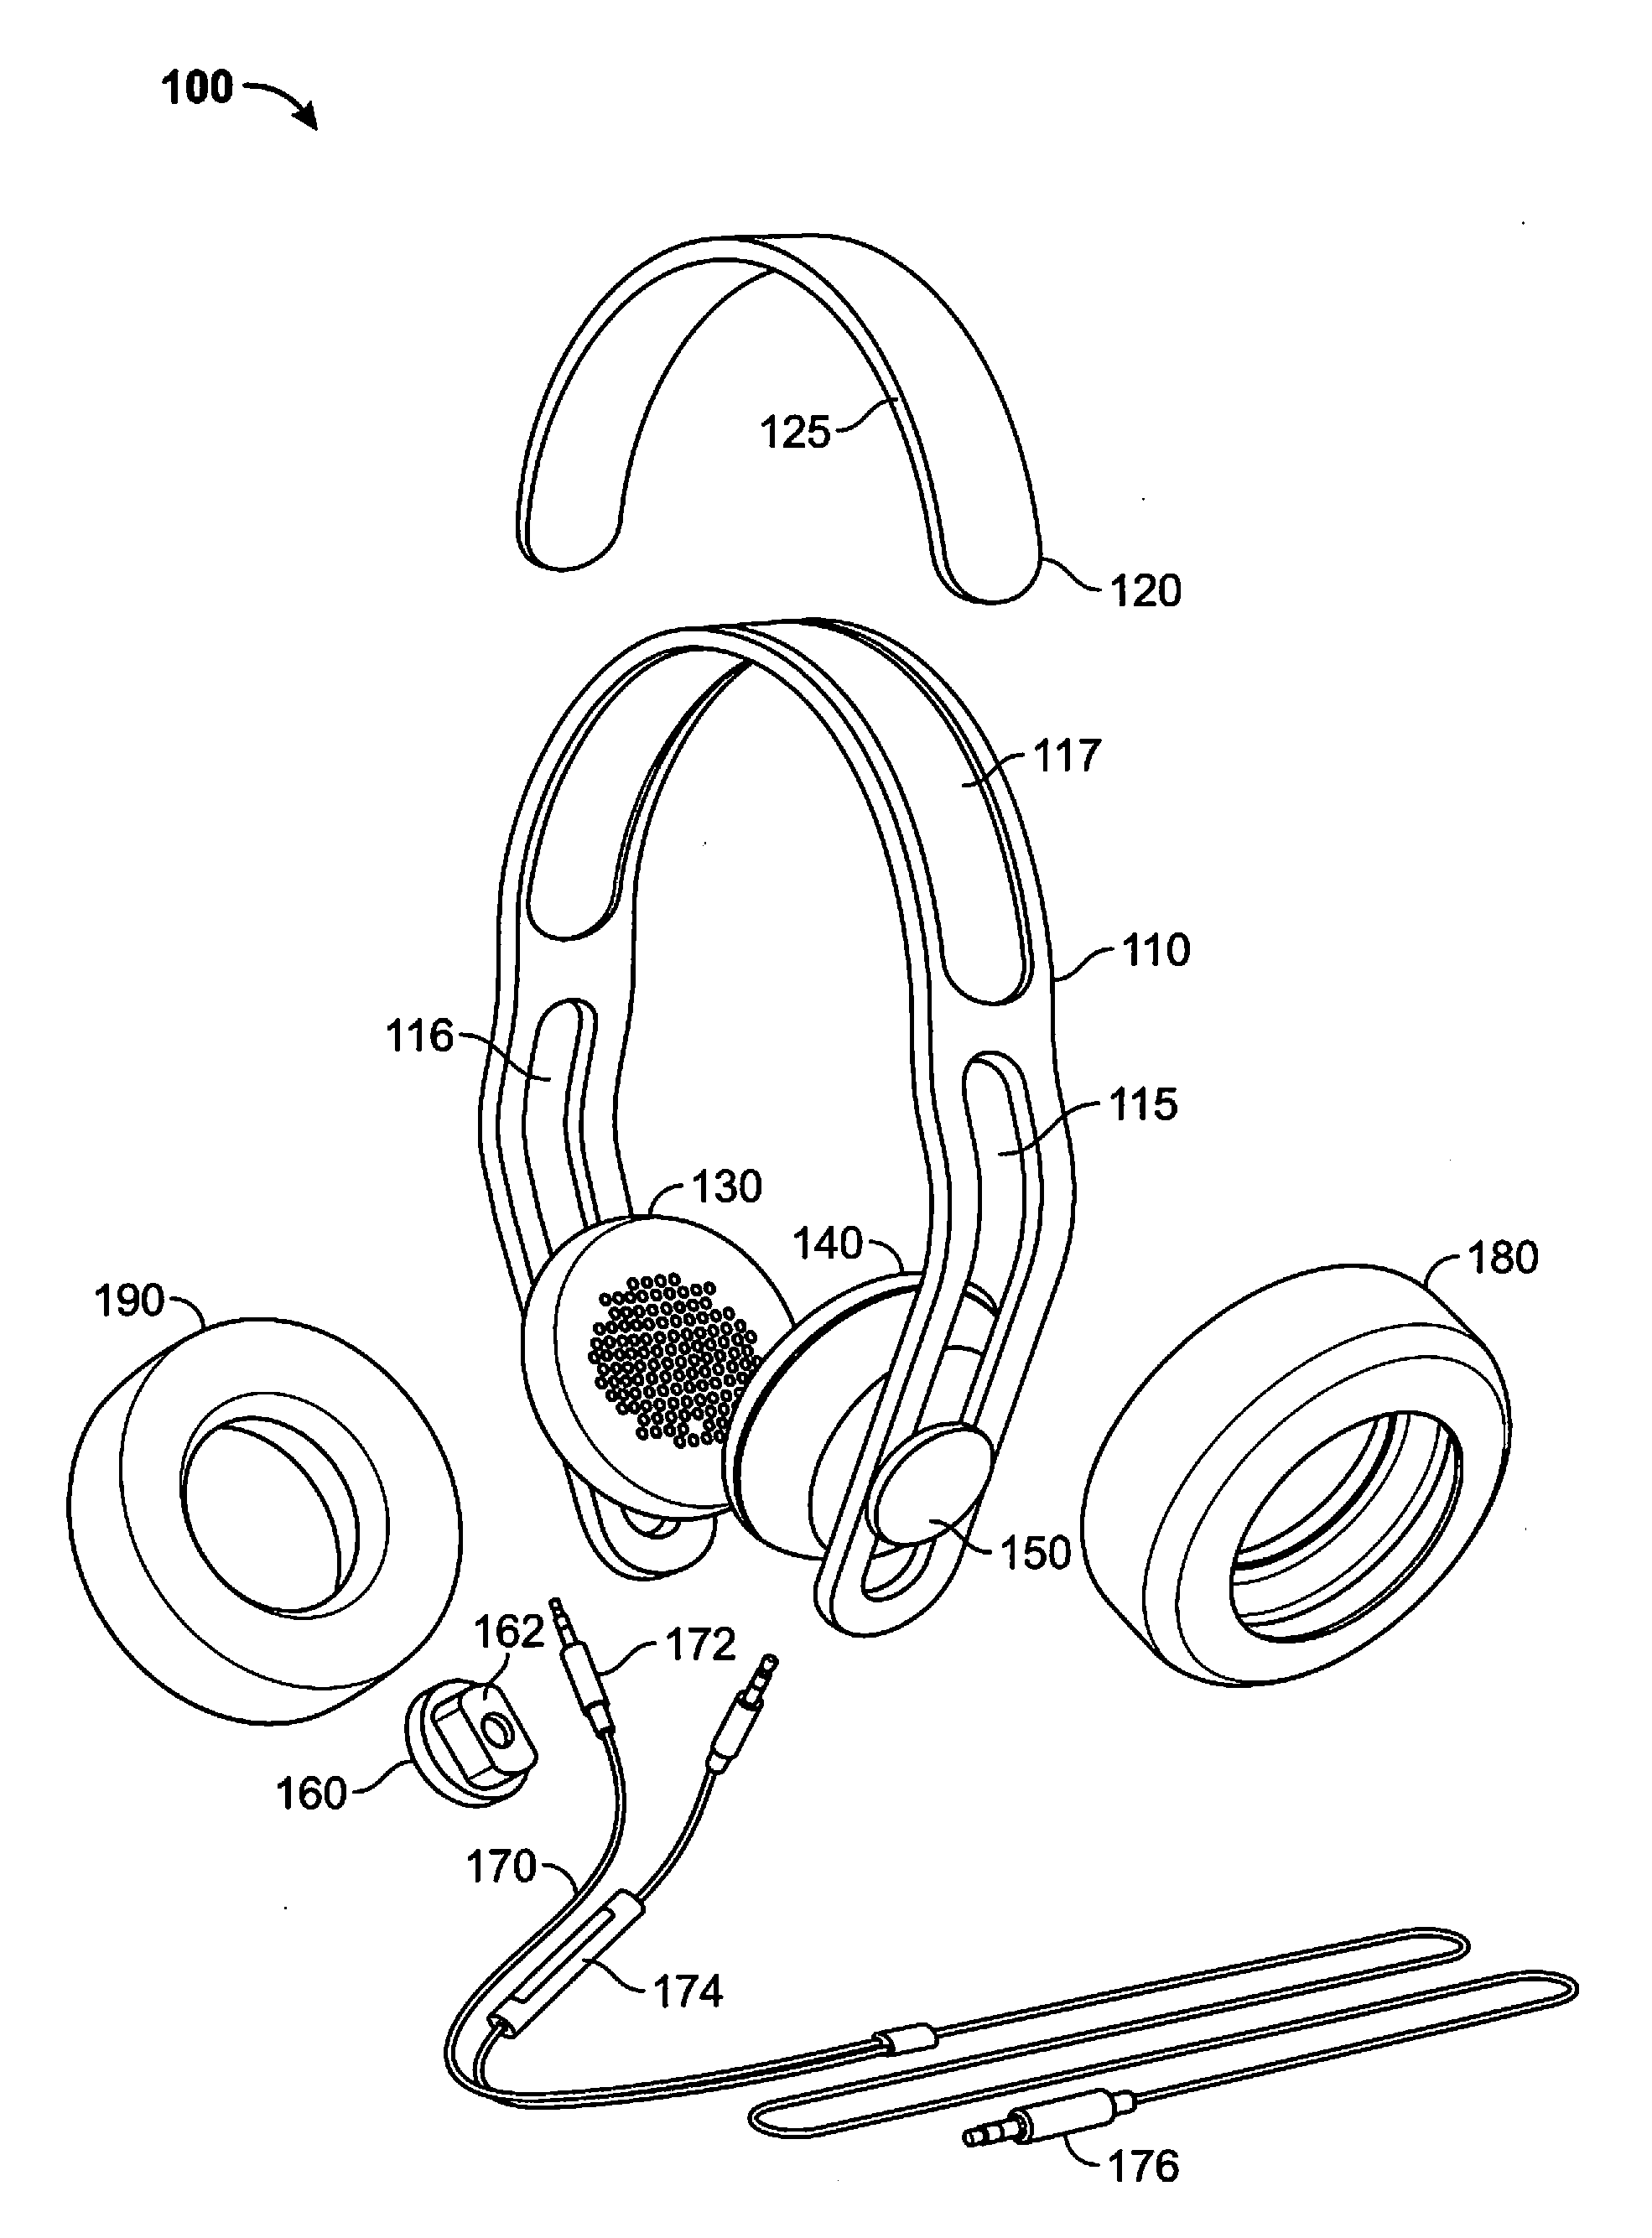 Personalized modular headphone system and method